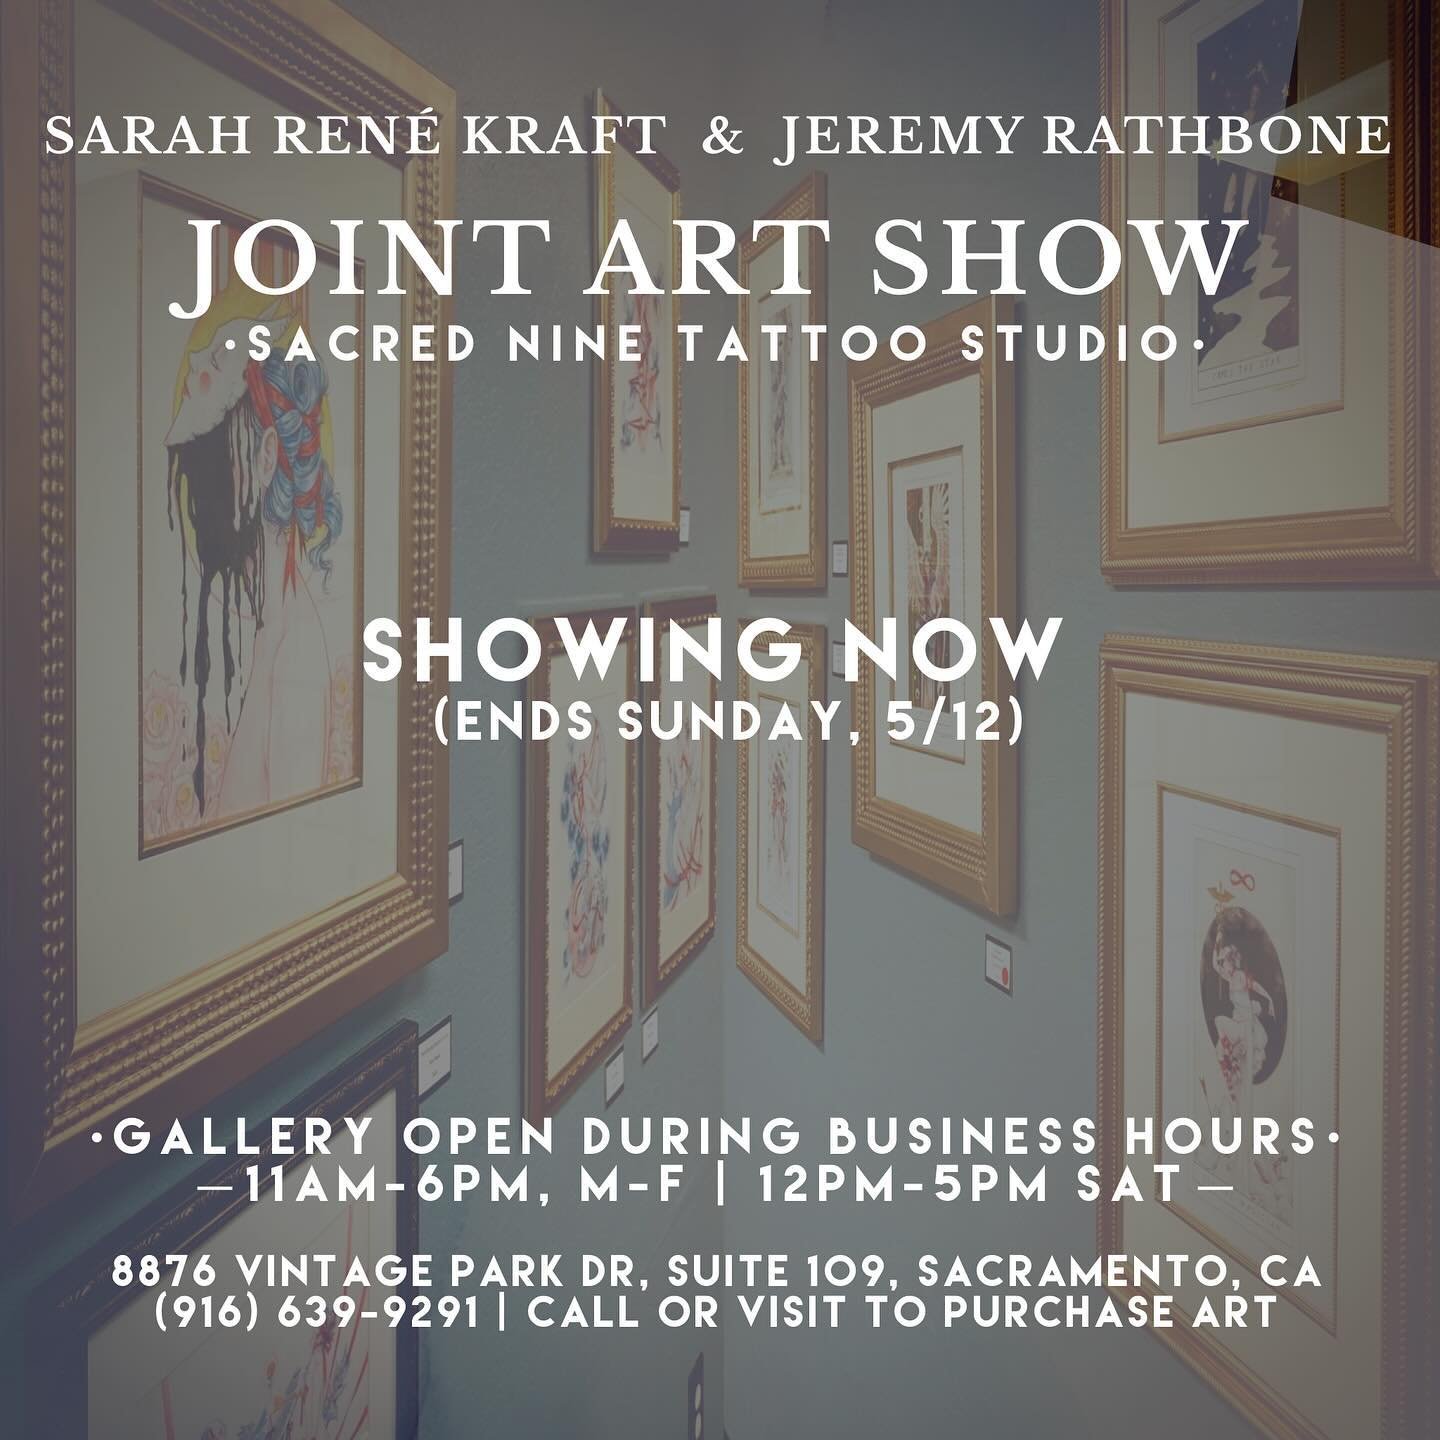 LAST CHANCE! Only showing until 5/12 @sacredninetattoo!🫀

You&rsquo;ve got just a couple weeks left to see the original works of both @sarahrenekraft &amp; @jeremyrathbone in person, and maybe pickup a very special piece while you&rsquo;re there.

E